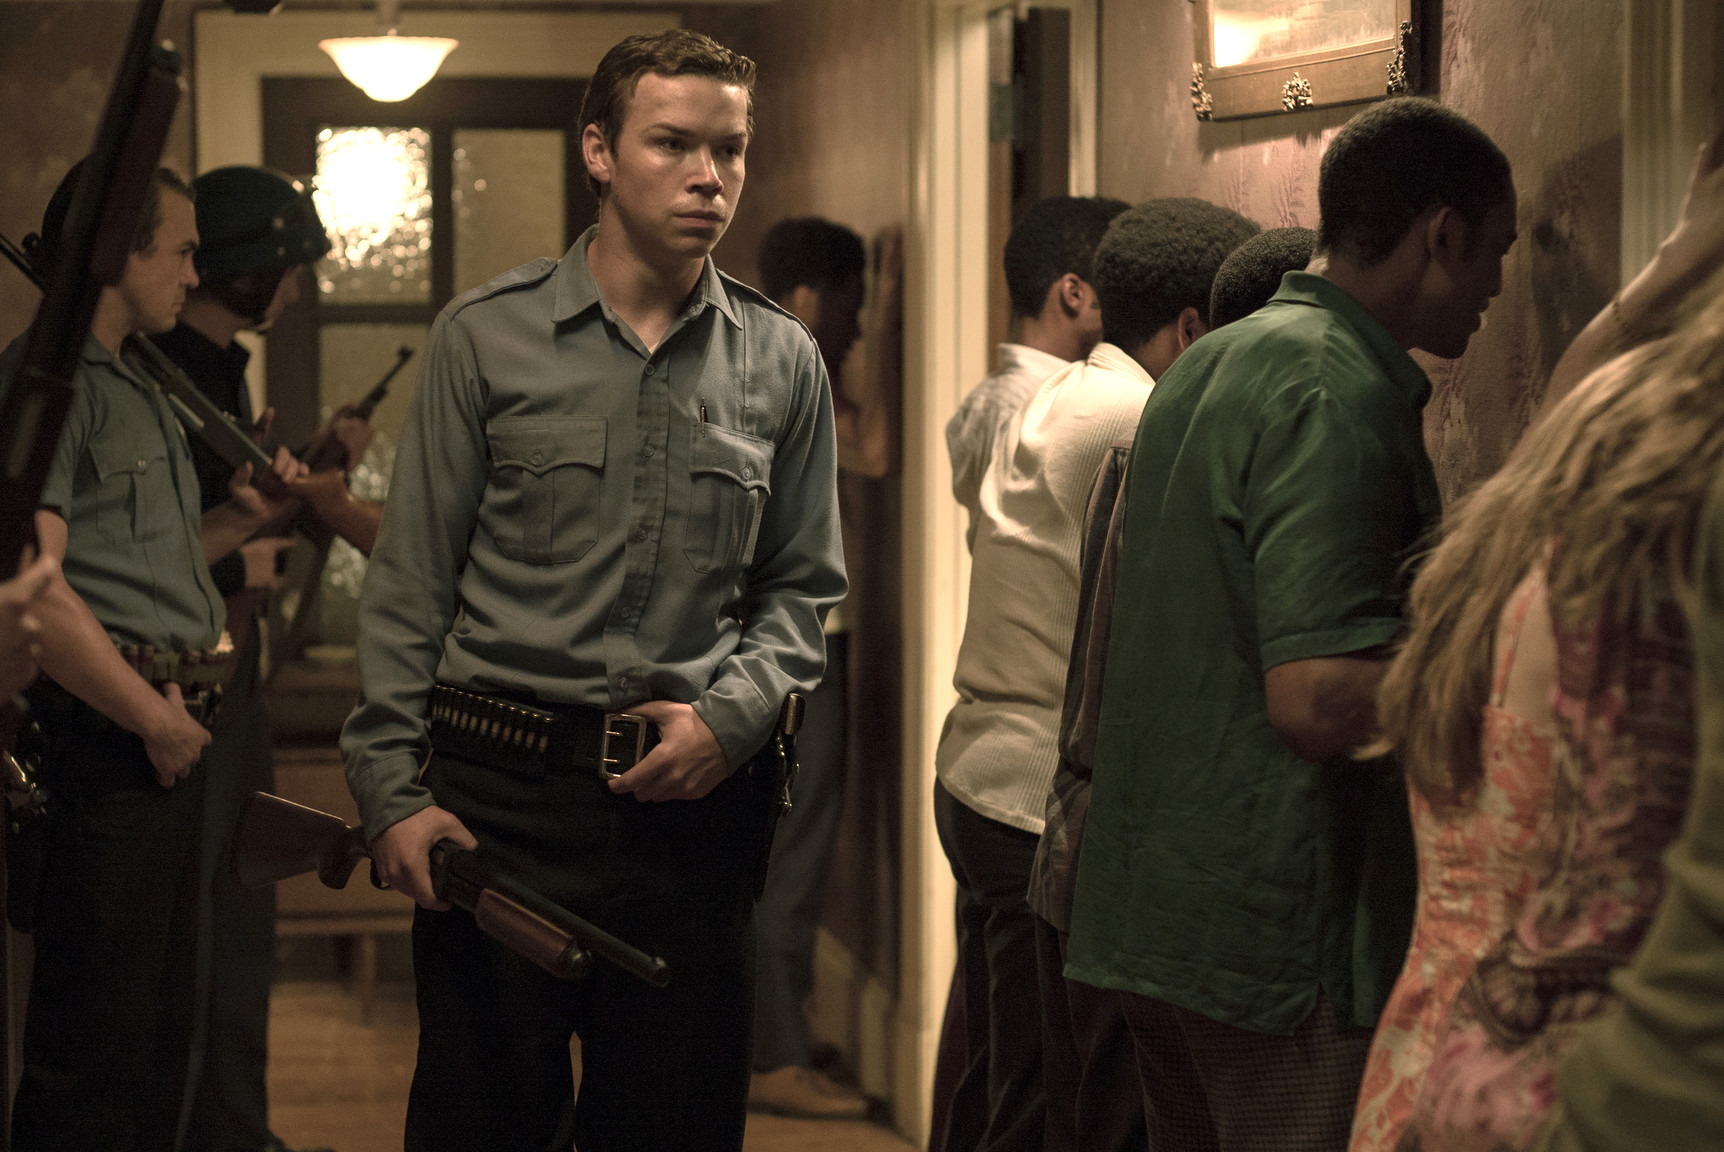 Still from the film “Detroit.” Photo courtesy of Annapurna Pictures